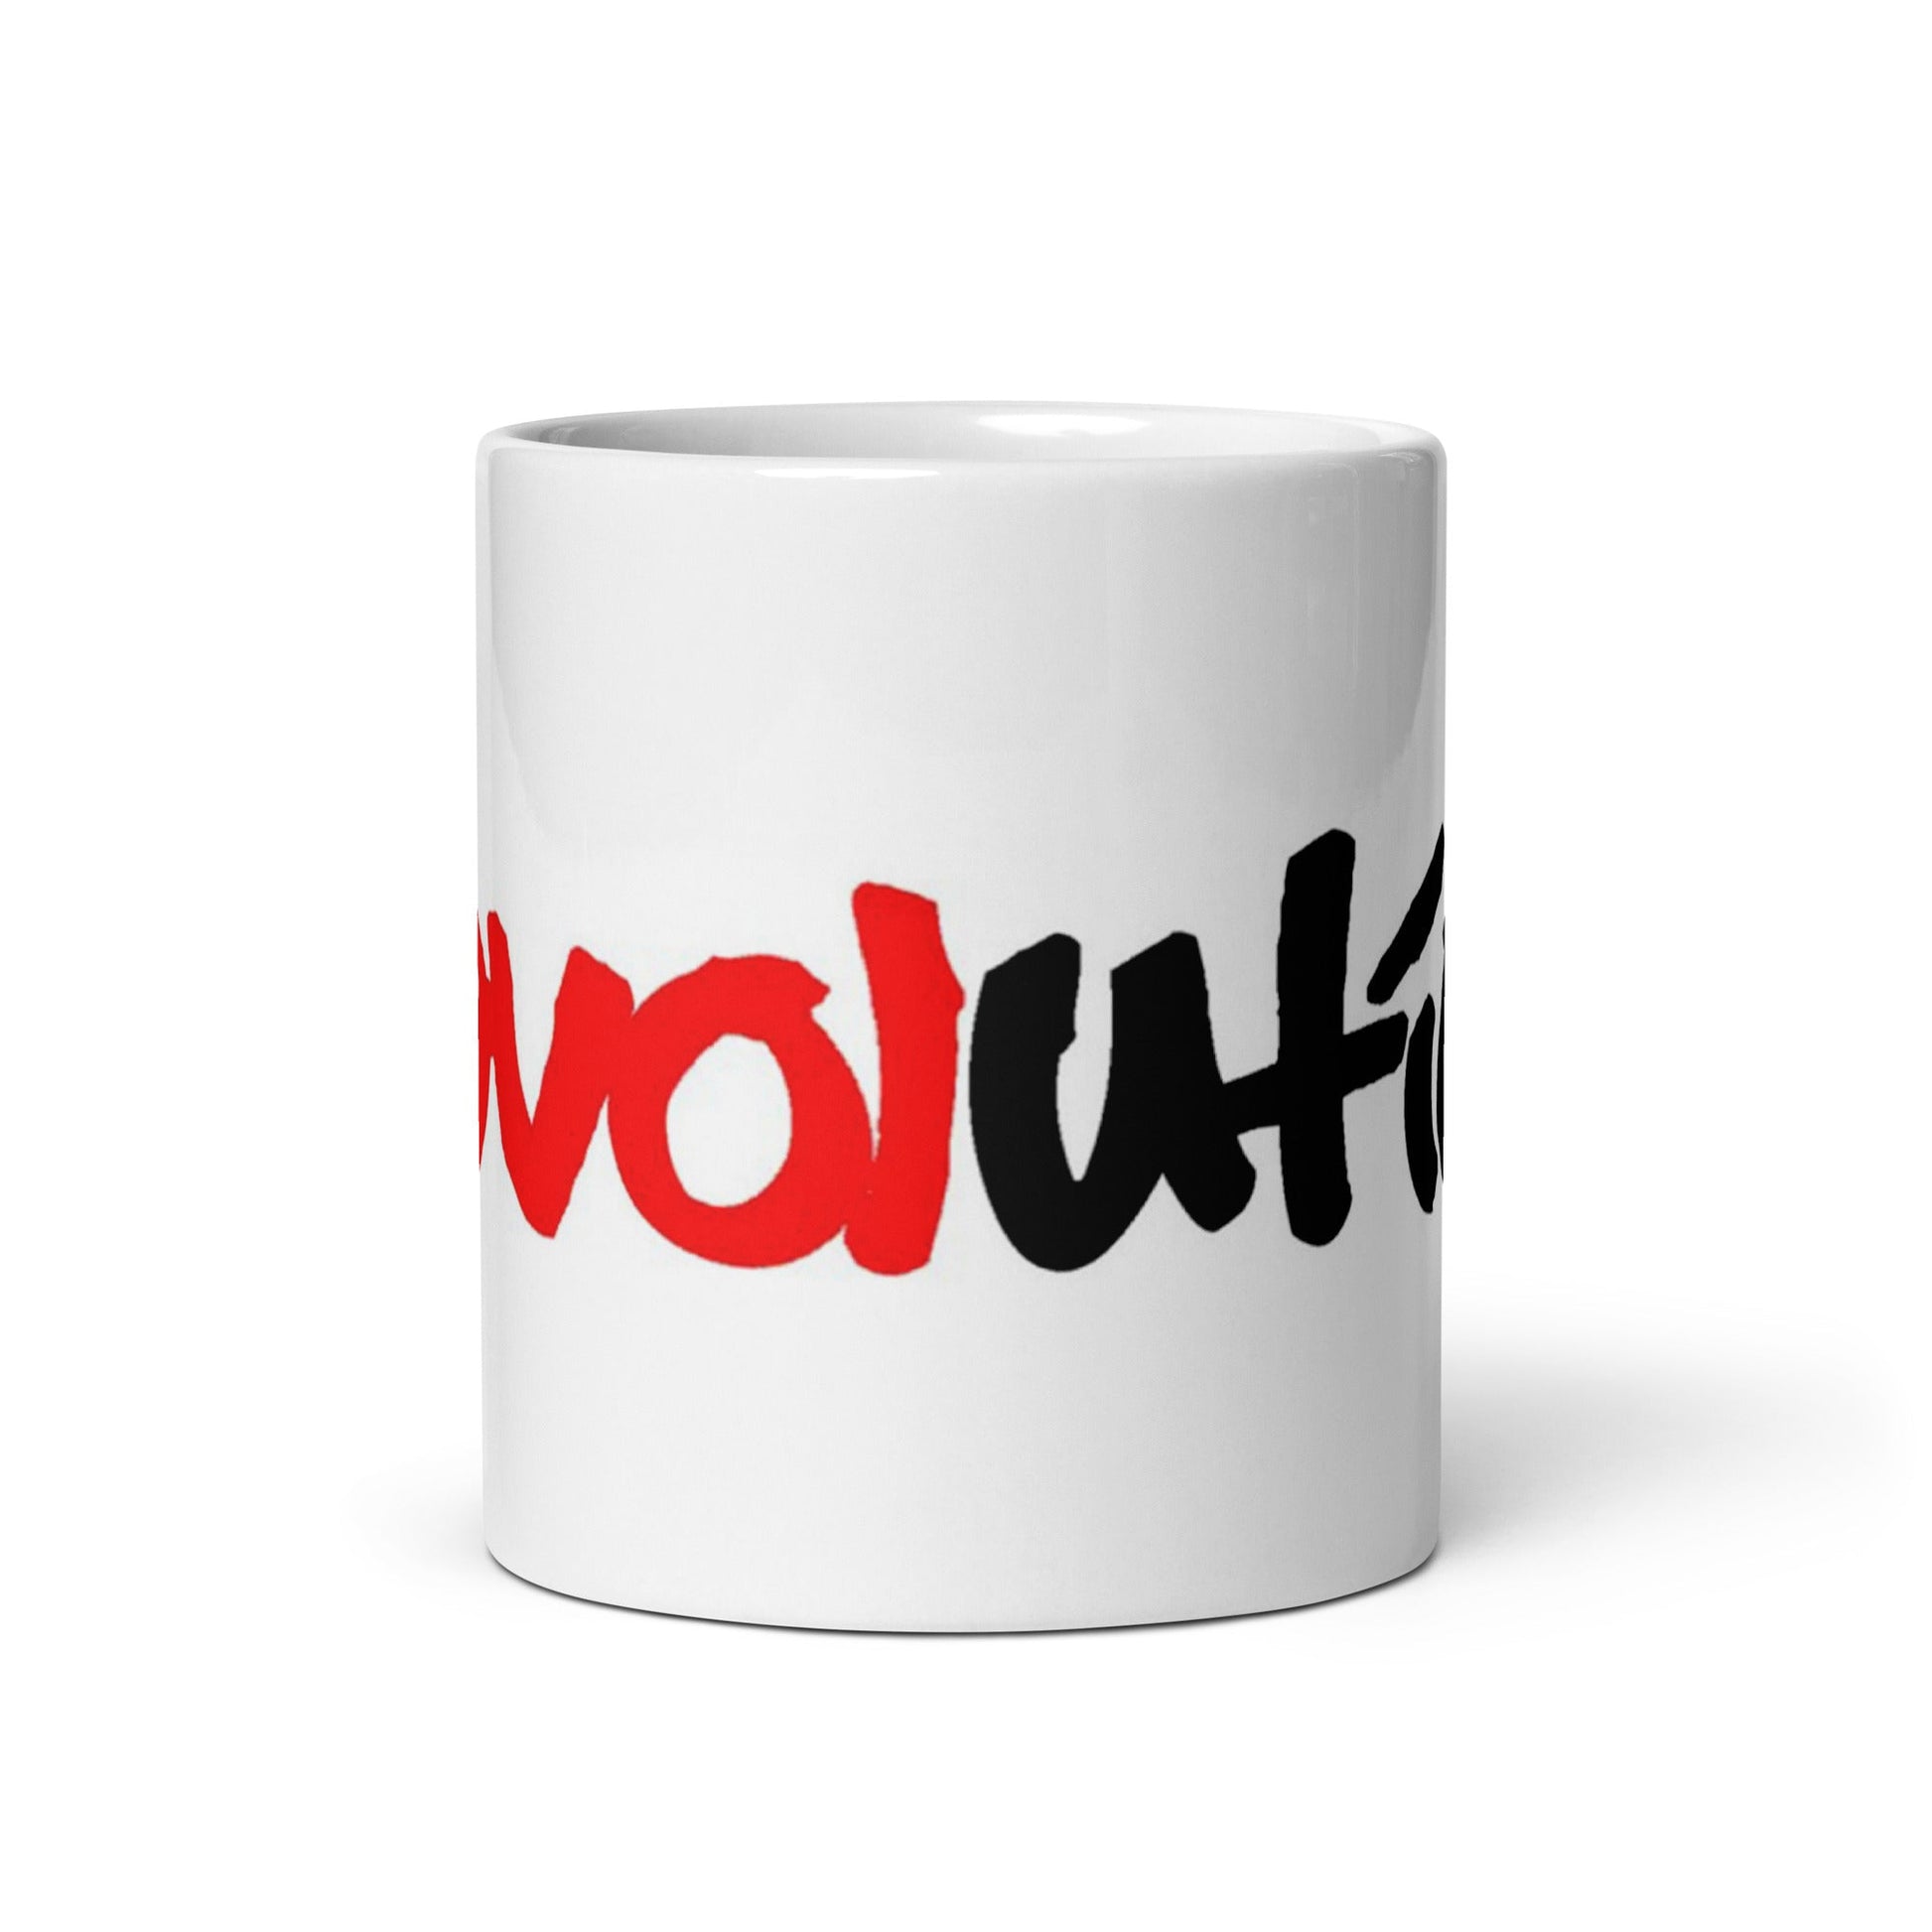 ReLOVEution - glossy mug - Souled Out World